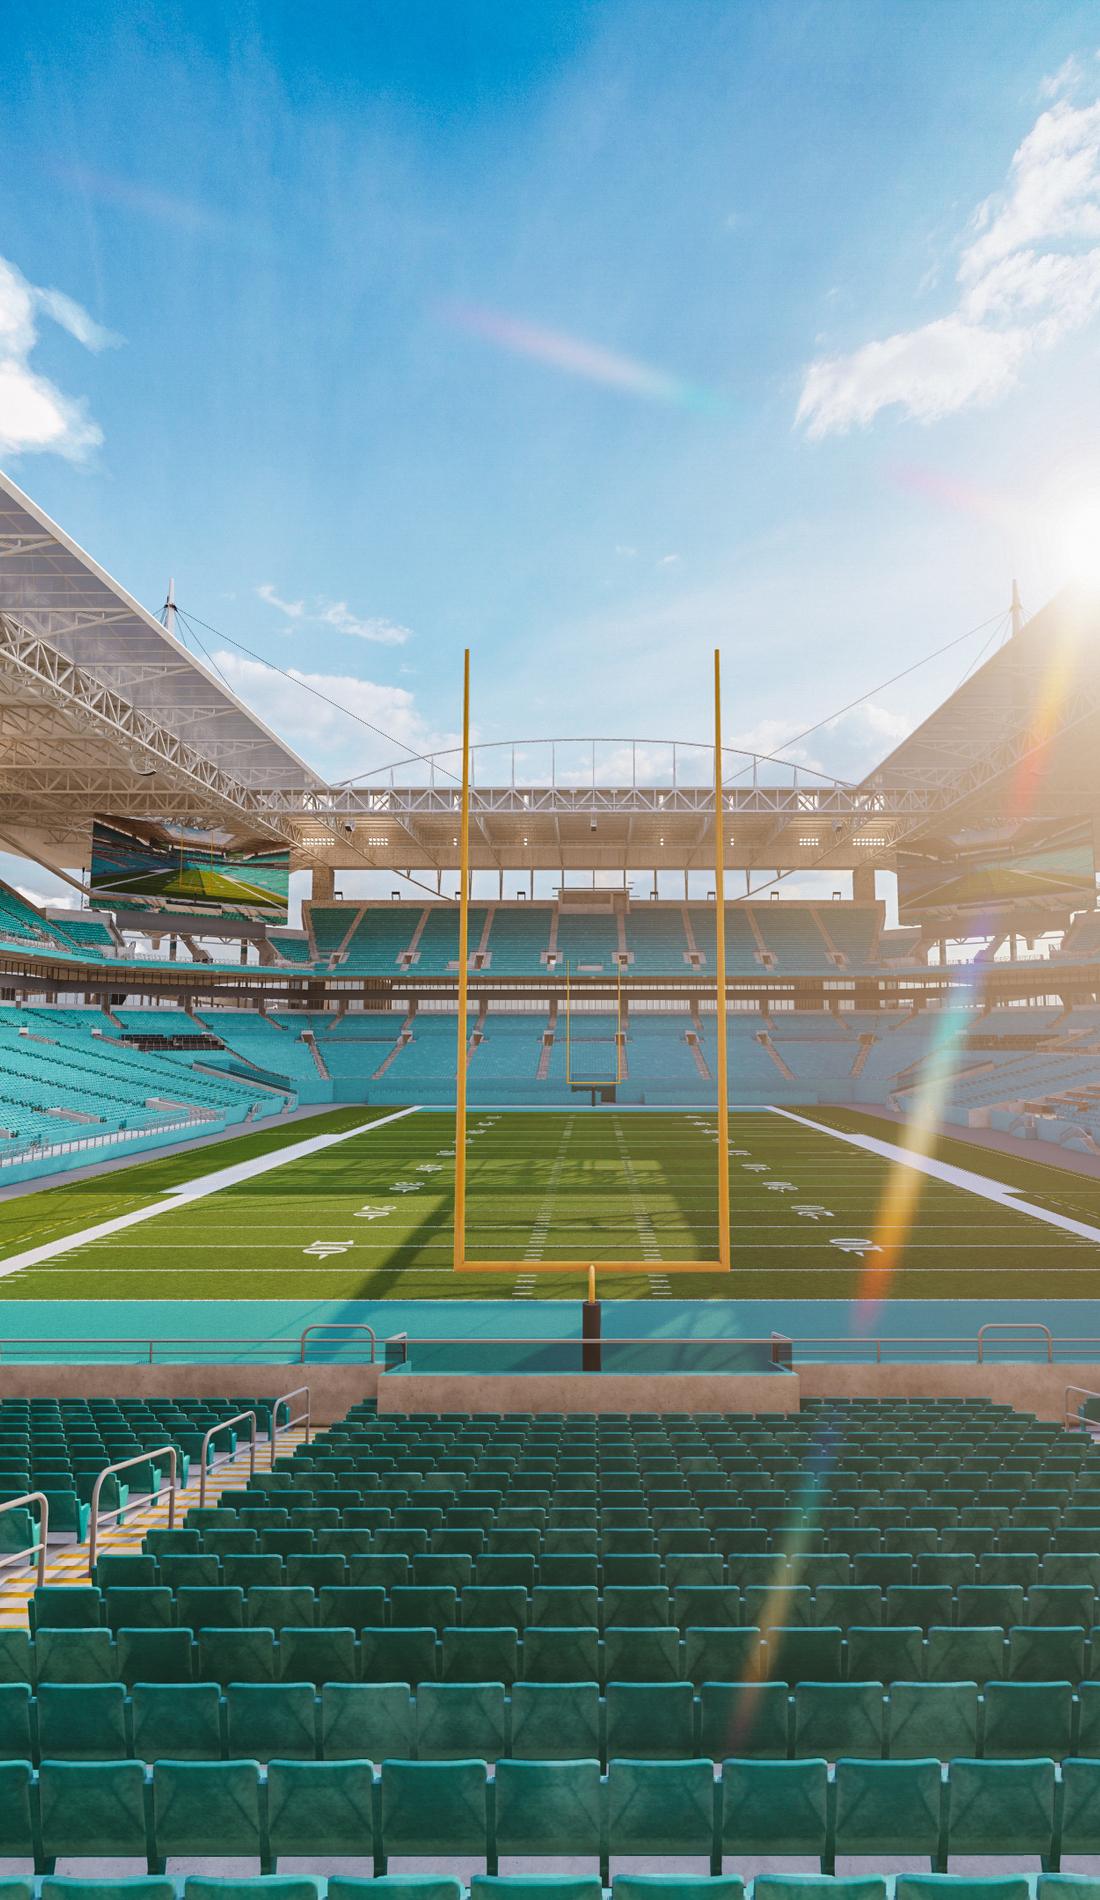 face value miami dolphins tickets